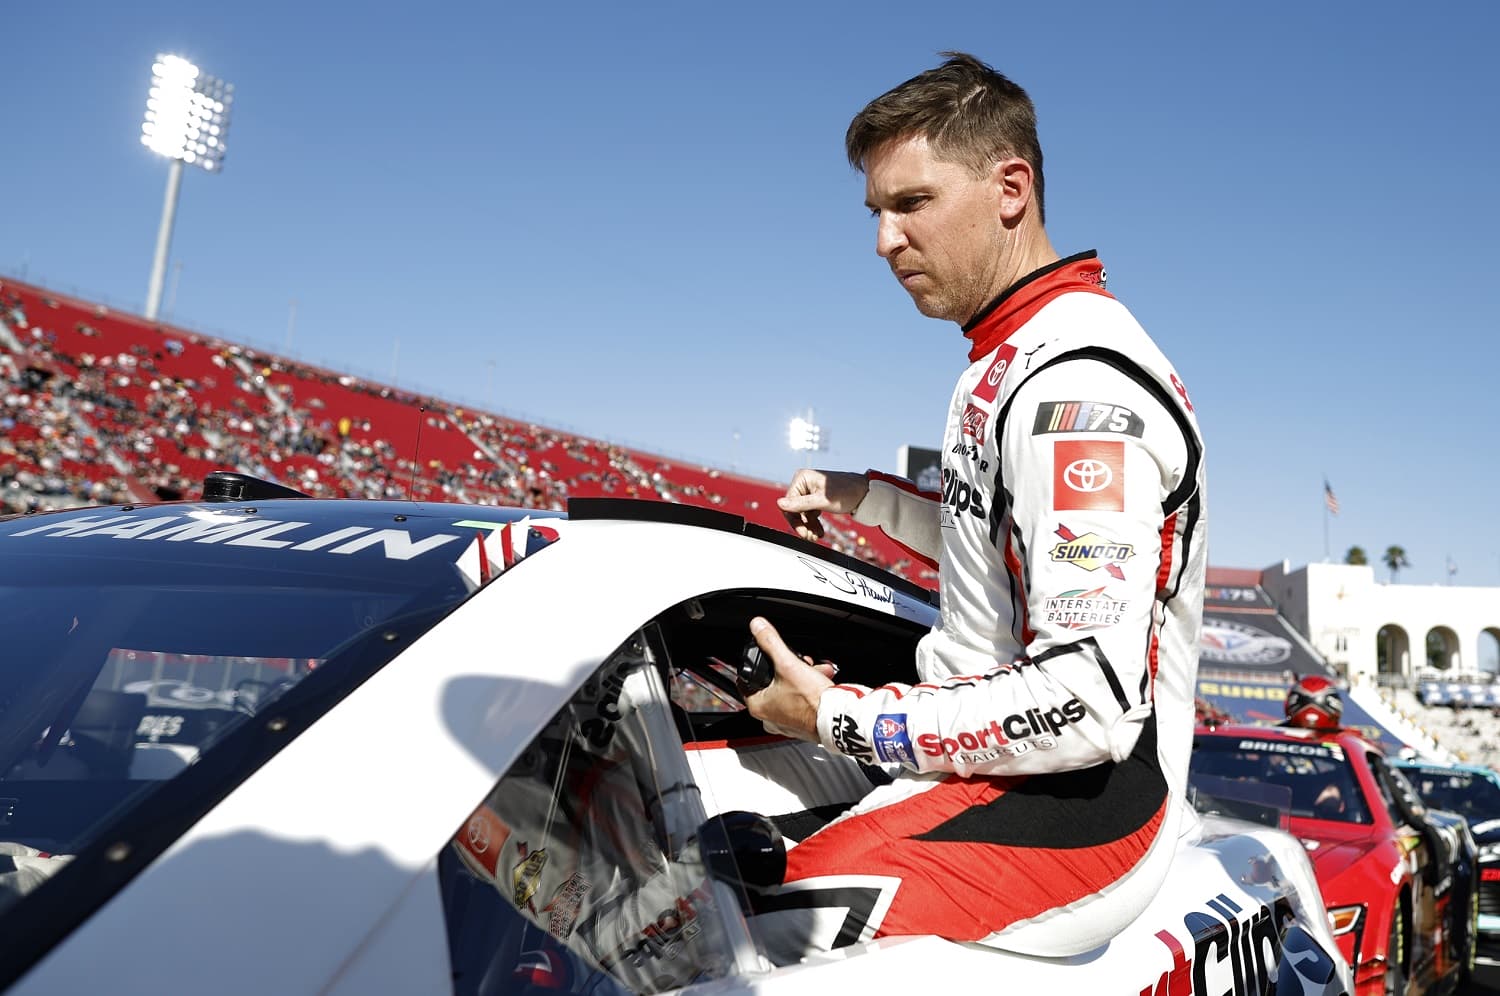 Denny Hamlin enters his car for a qualifying heat in the NASCAR Clash at the Coliseum at Los Angeles Memorial Coliseum on Feb. 5, 2023. | Chris Graythen/Getty Images